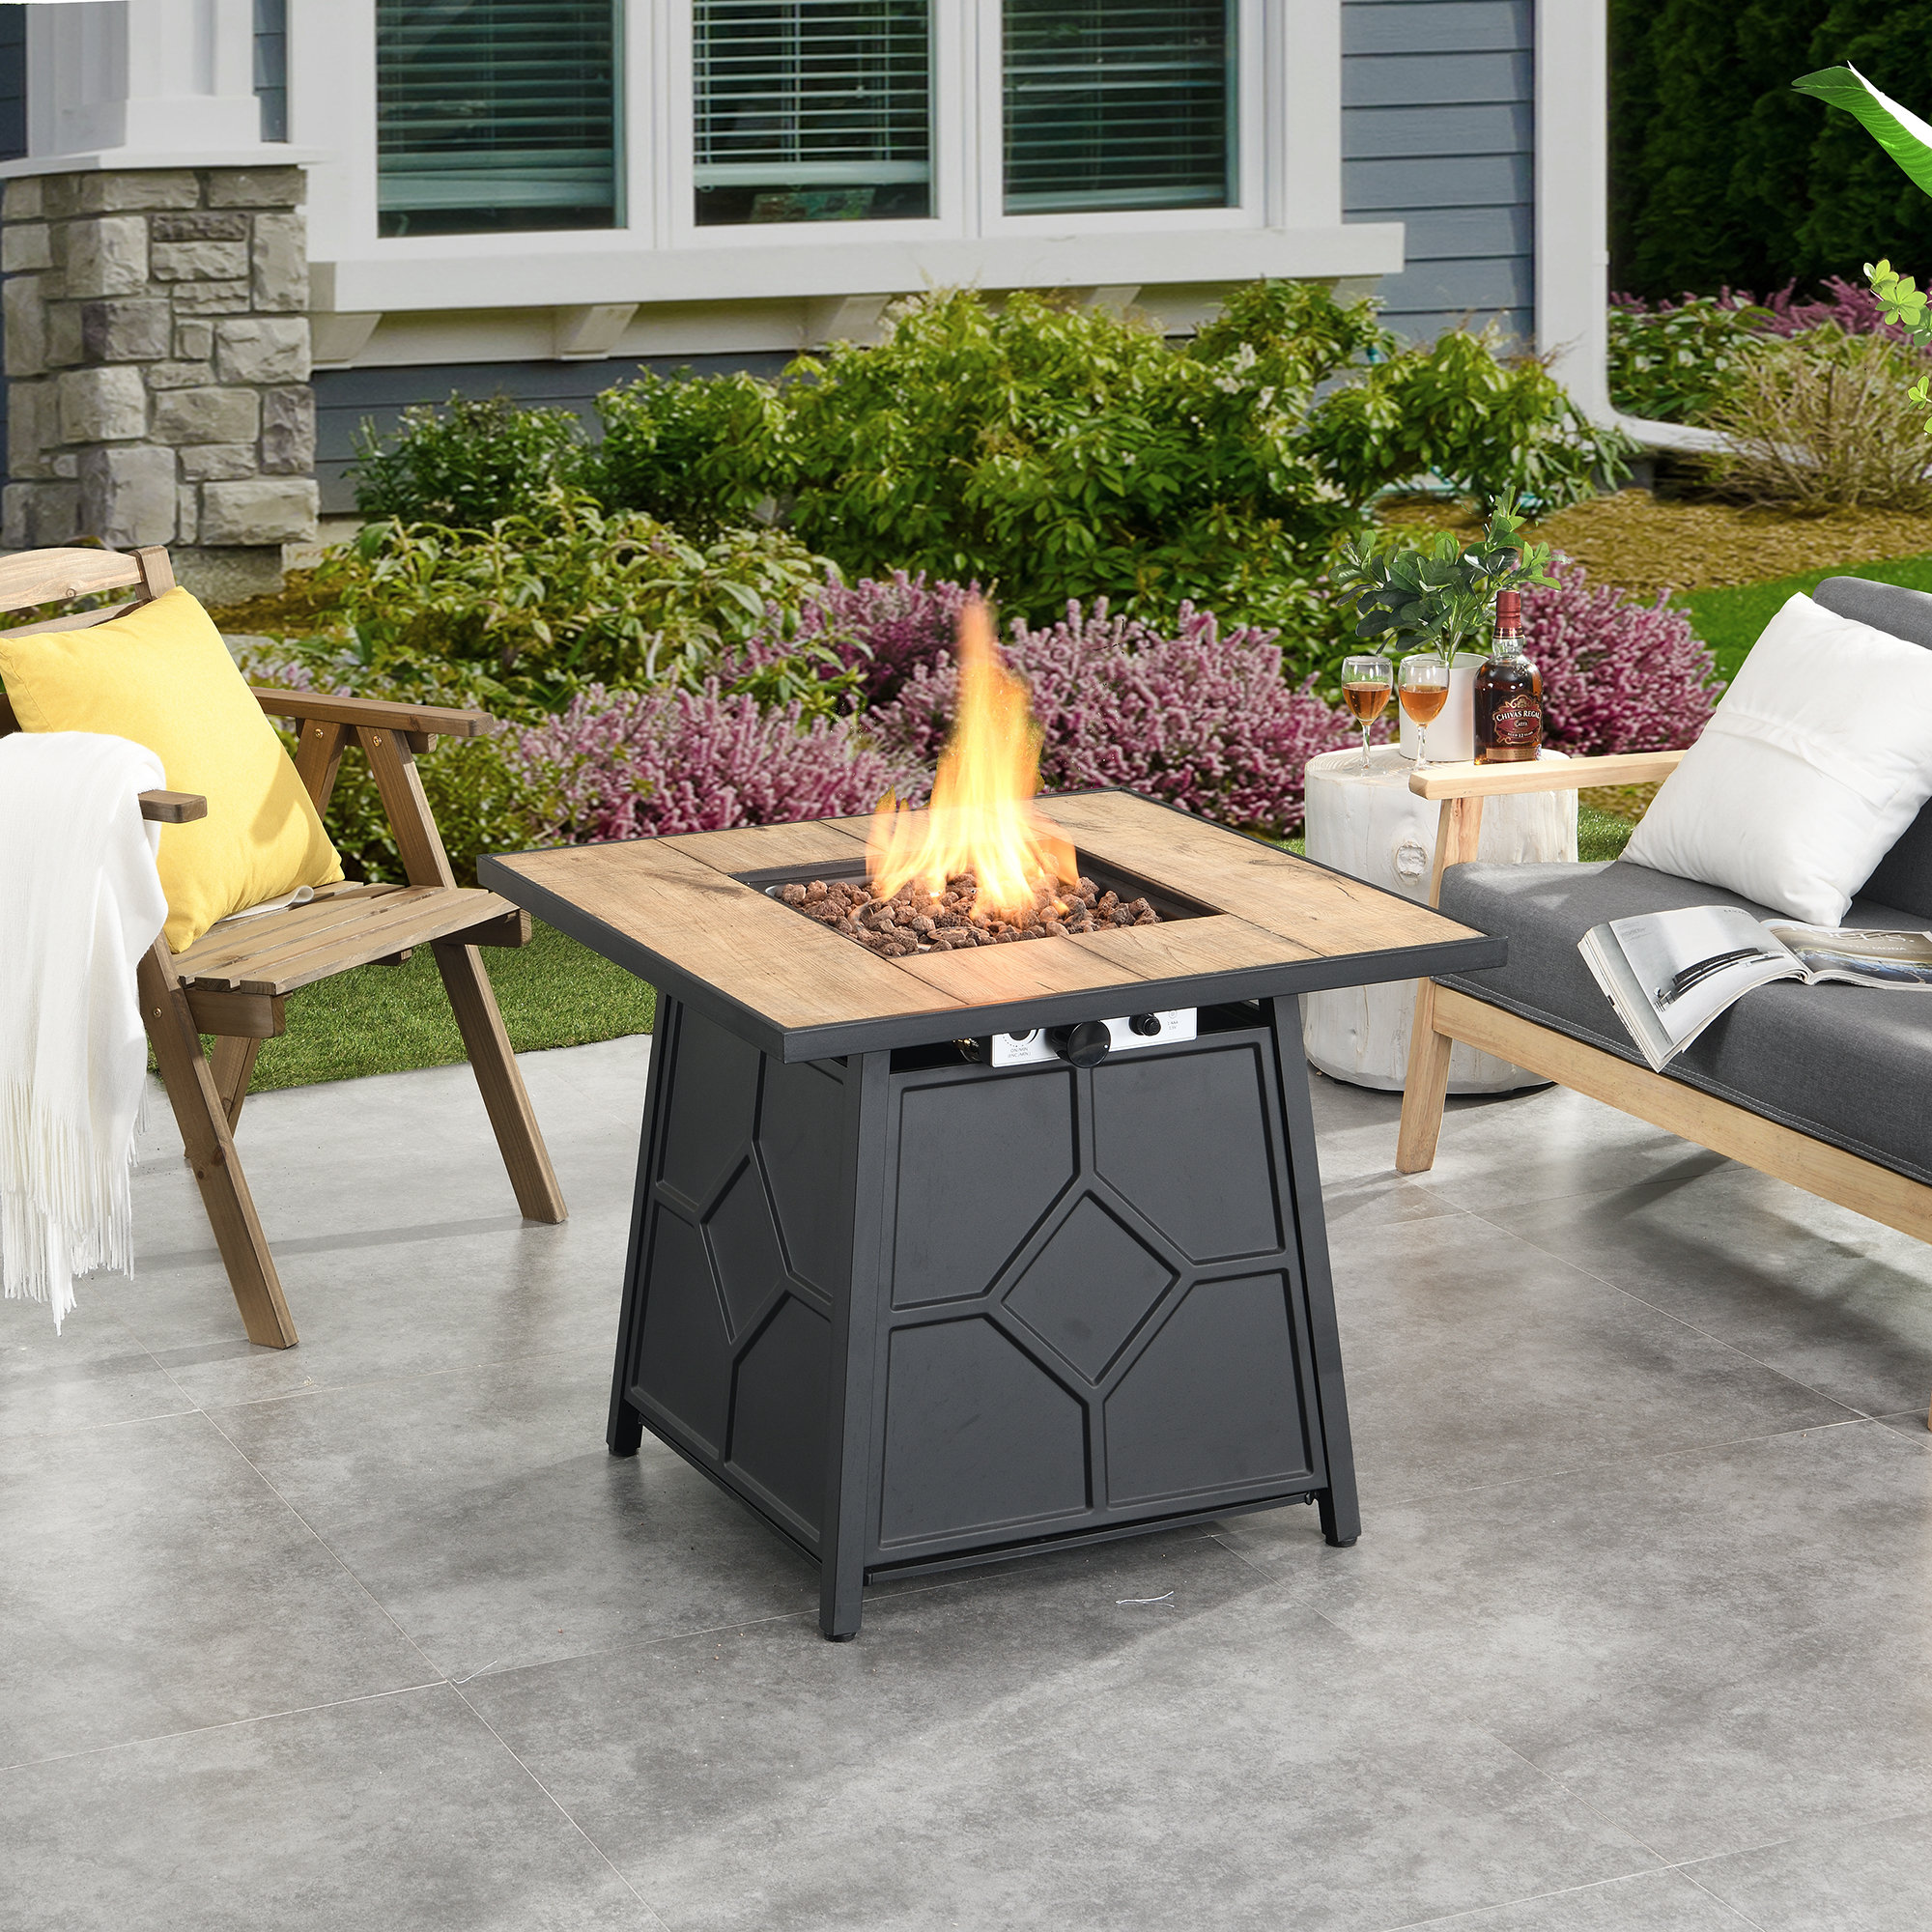 Red Barrel Studio® Fire Pit Table, 30“ Square 40,000 Btu Auto-Ignition  Outdoor Propane Gas Fire Pit With Waterproof Cover And Lid For Courtyard  Balcony Garden Terrace,Csa Certification | Wayfair